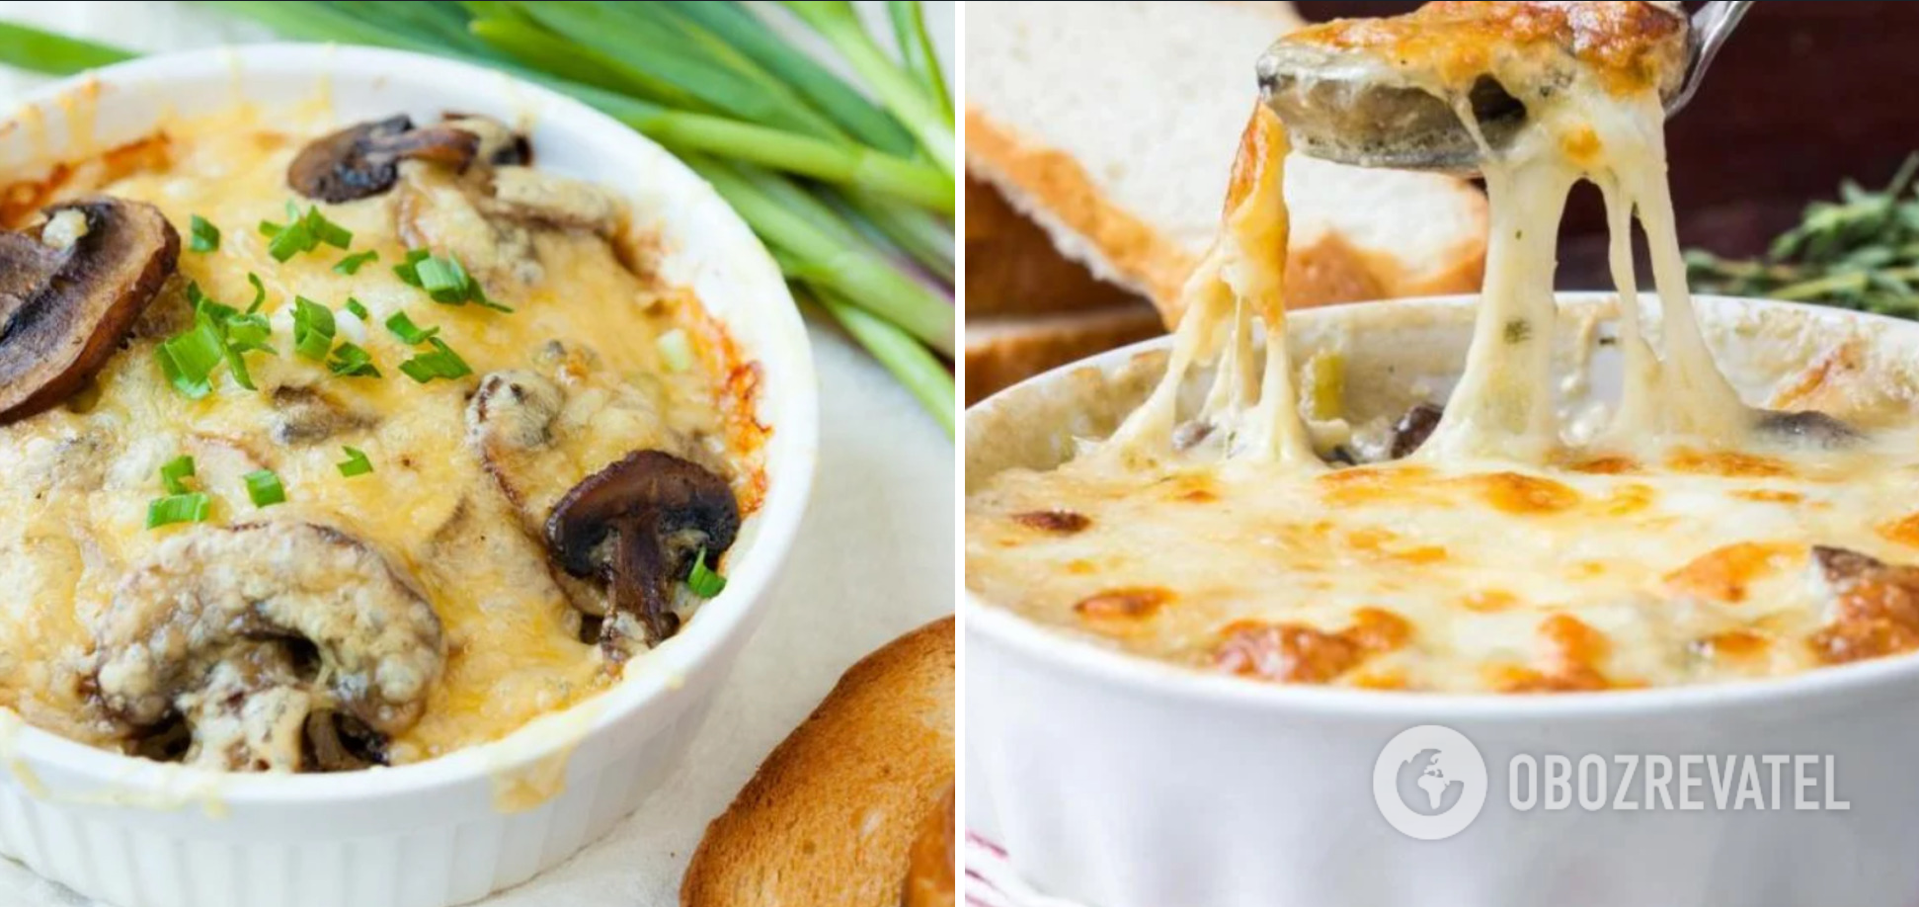 Classic julienne with chicken and mushrooms